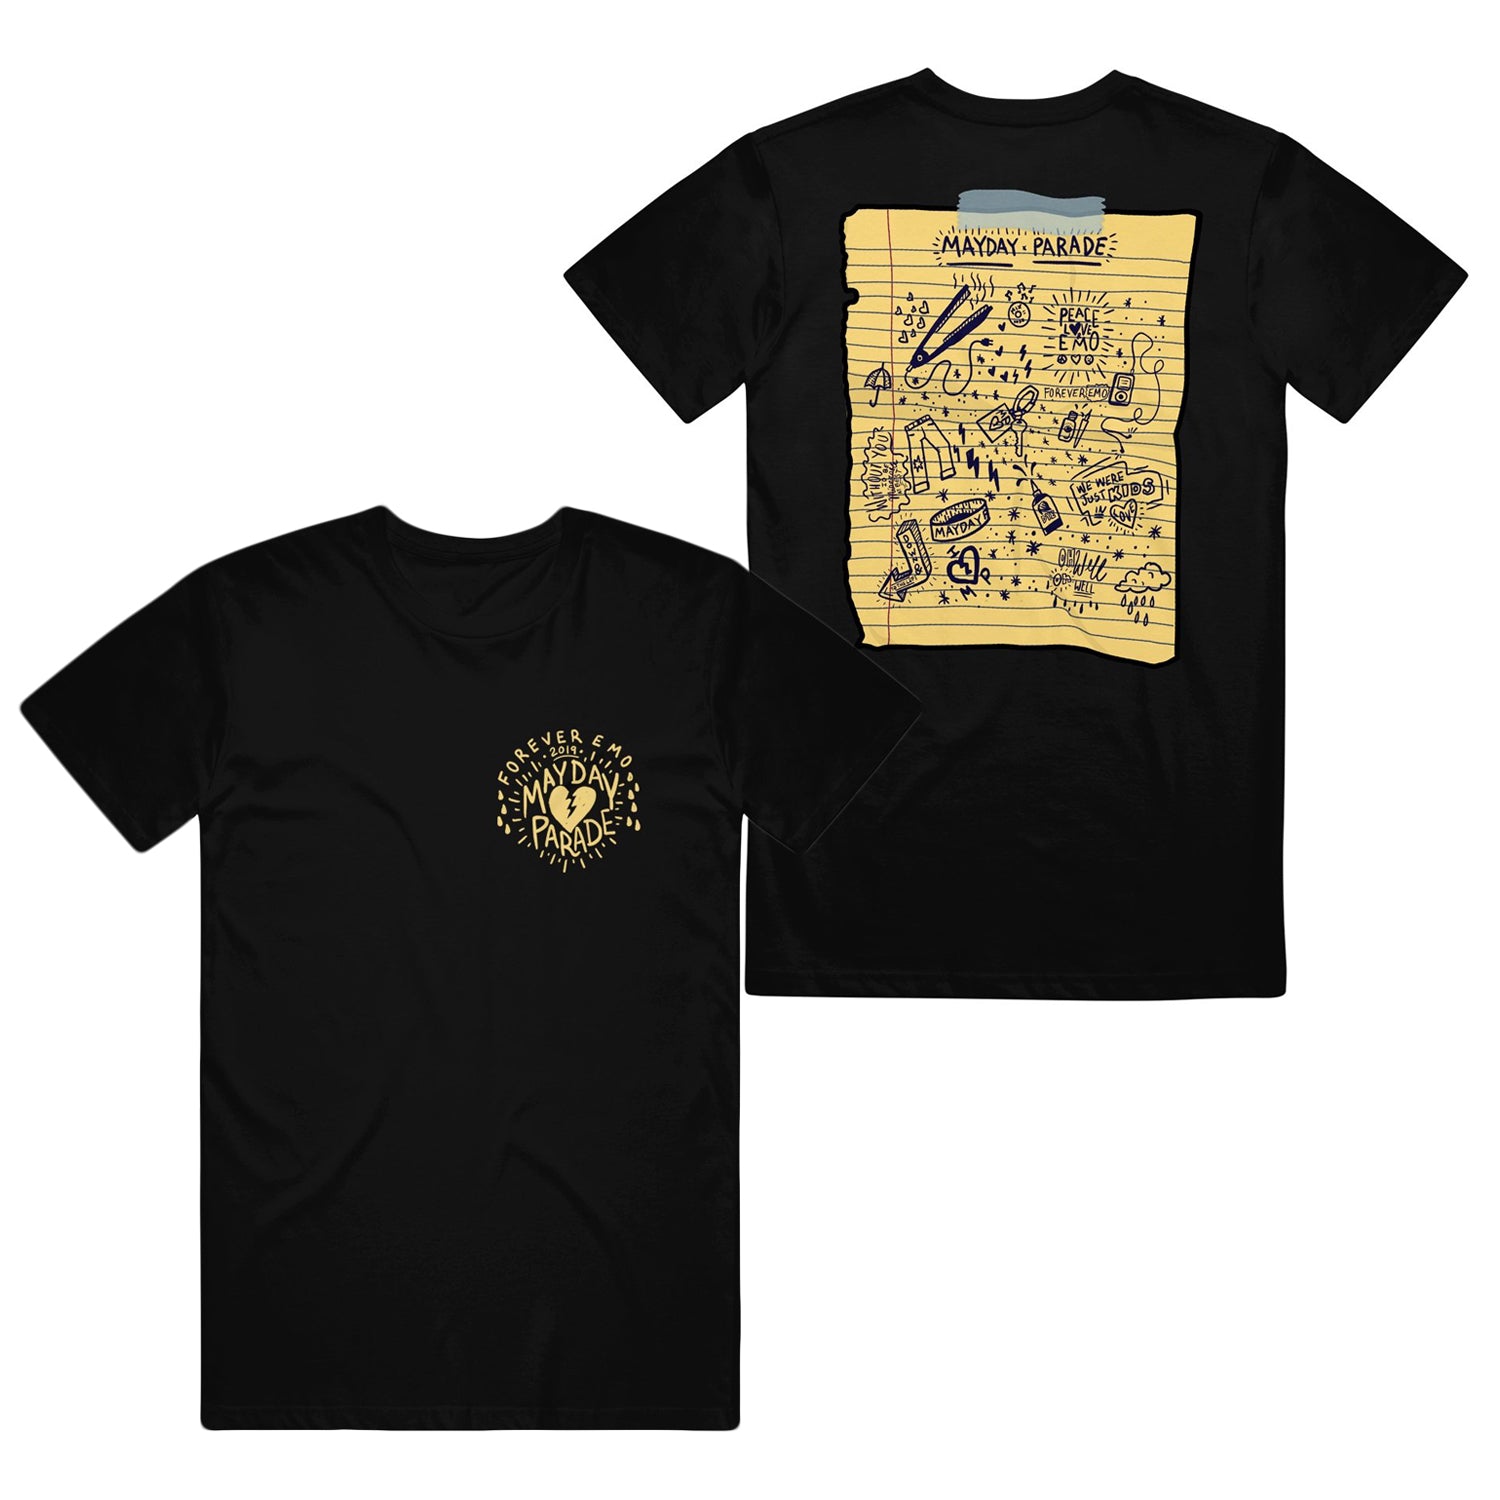 image of the front and back of a black tee shirt on a white background. the front of the tee is on the left and has a small chest print on the right in yellow that says mayday parade with a broken heart and forever emo 2019 on the top in a circlular design. the back of the tee is on the right and has a full back print of a torn out yellow page of a note book that says mayday parade with doodles of a hair straighter, jeans, keys, hearts, clouds and other random designs